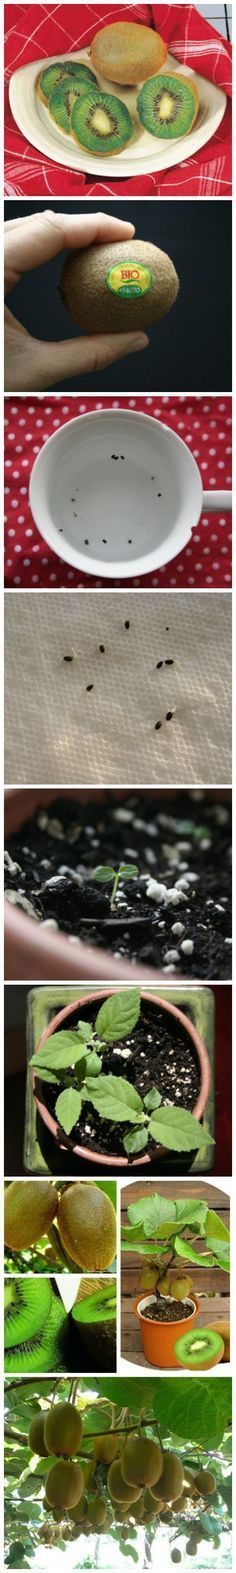 How To Grow A Kiwi #Plant From Seed – DIY: